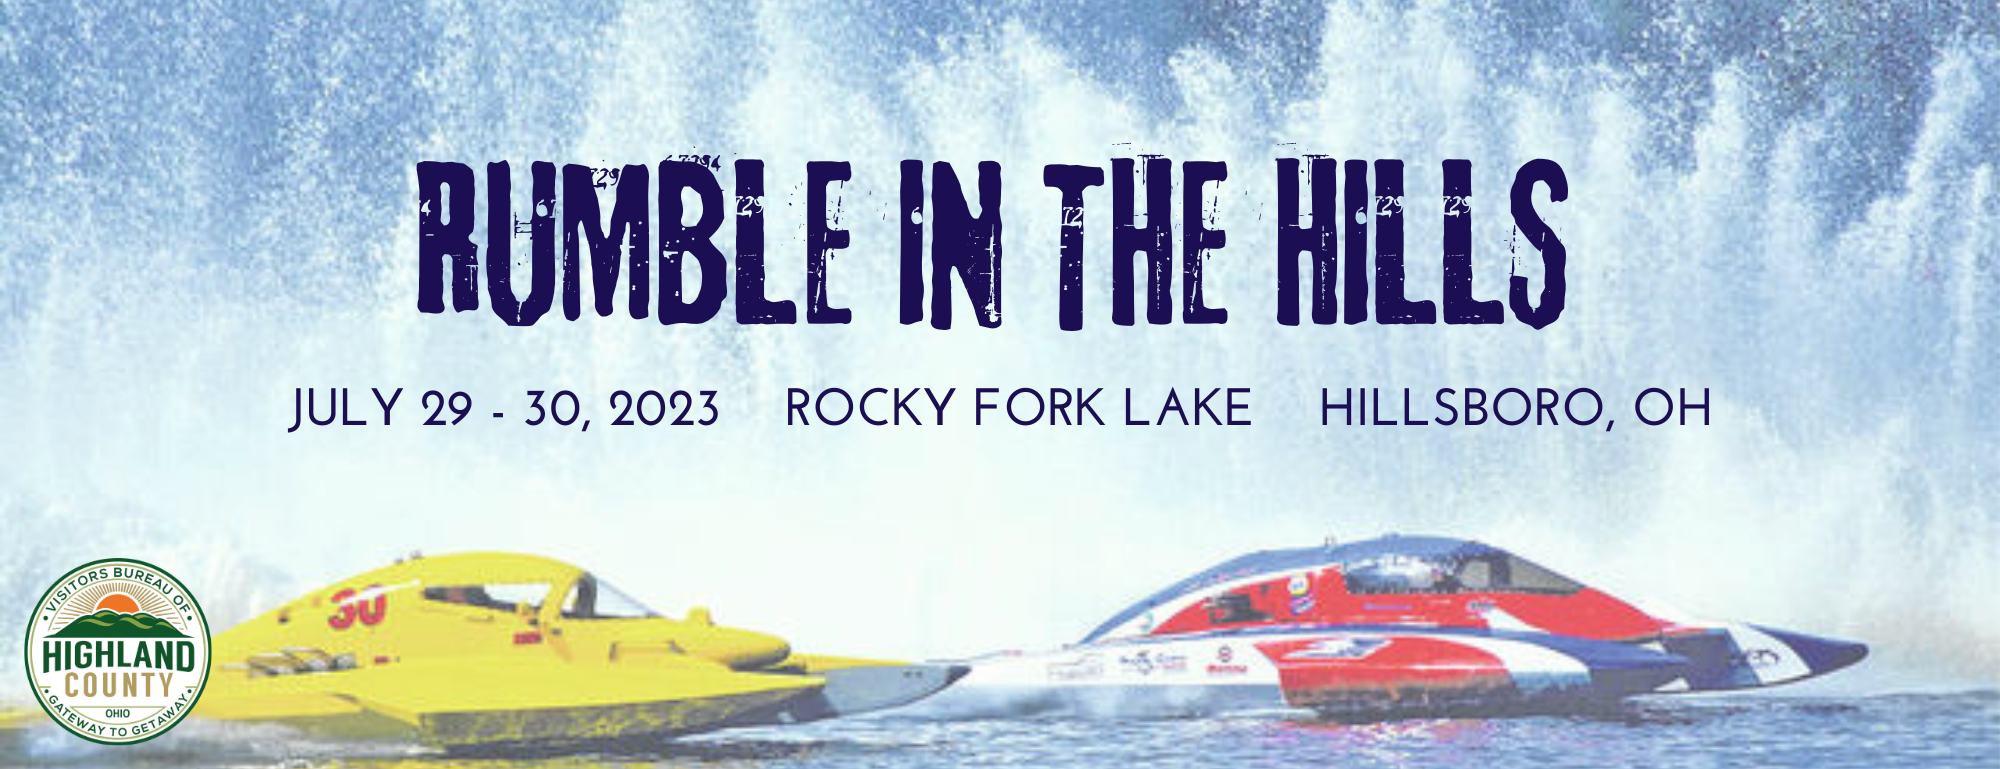 Rumble in the Hills: A Weekend of Speed and Excitement